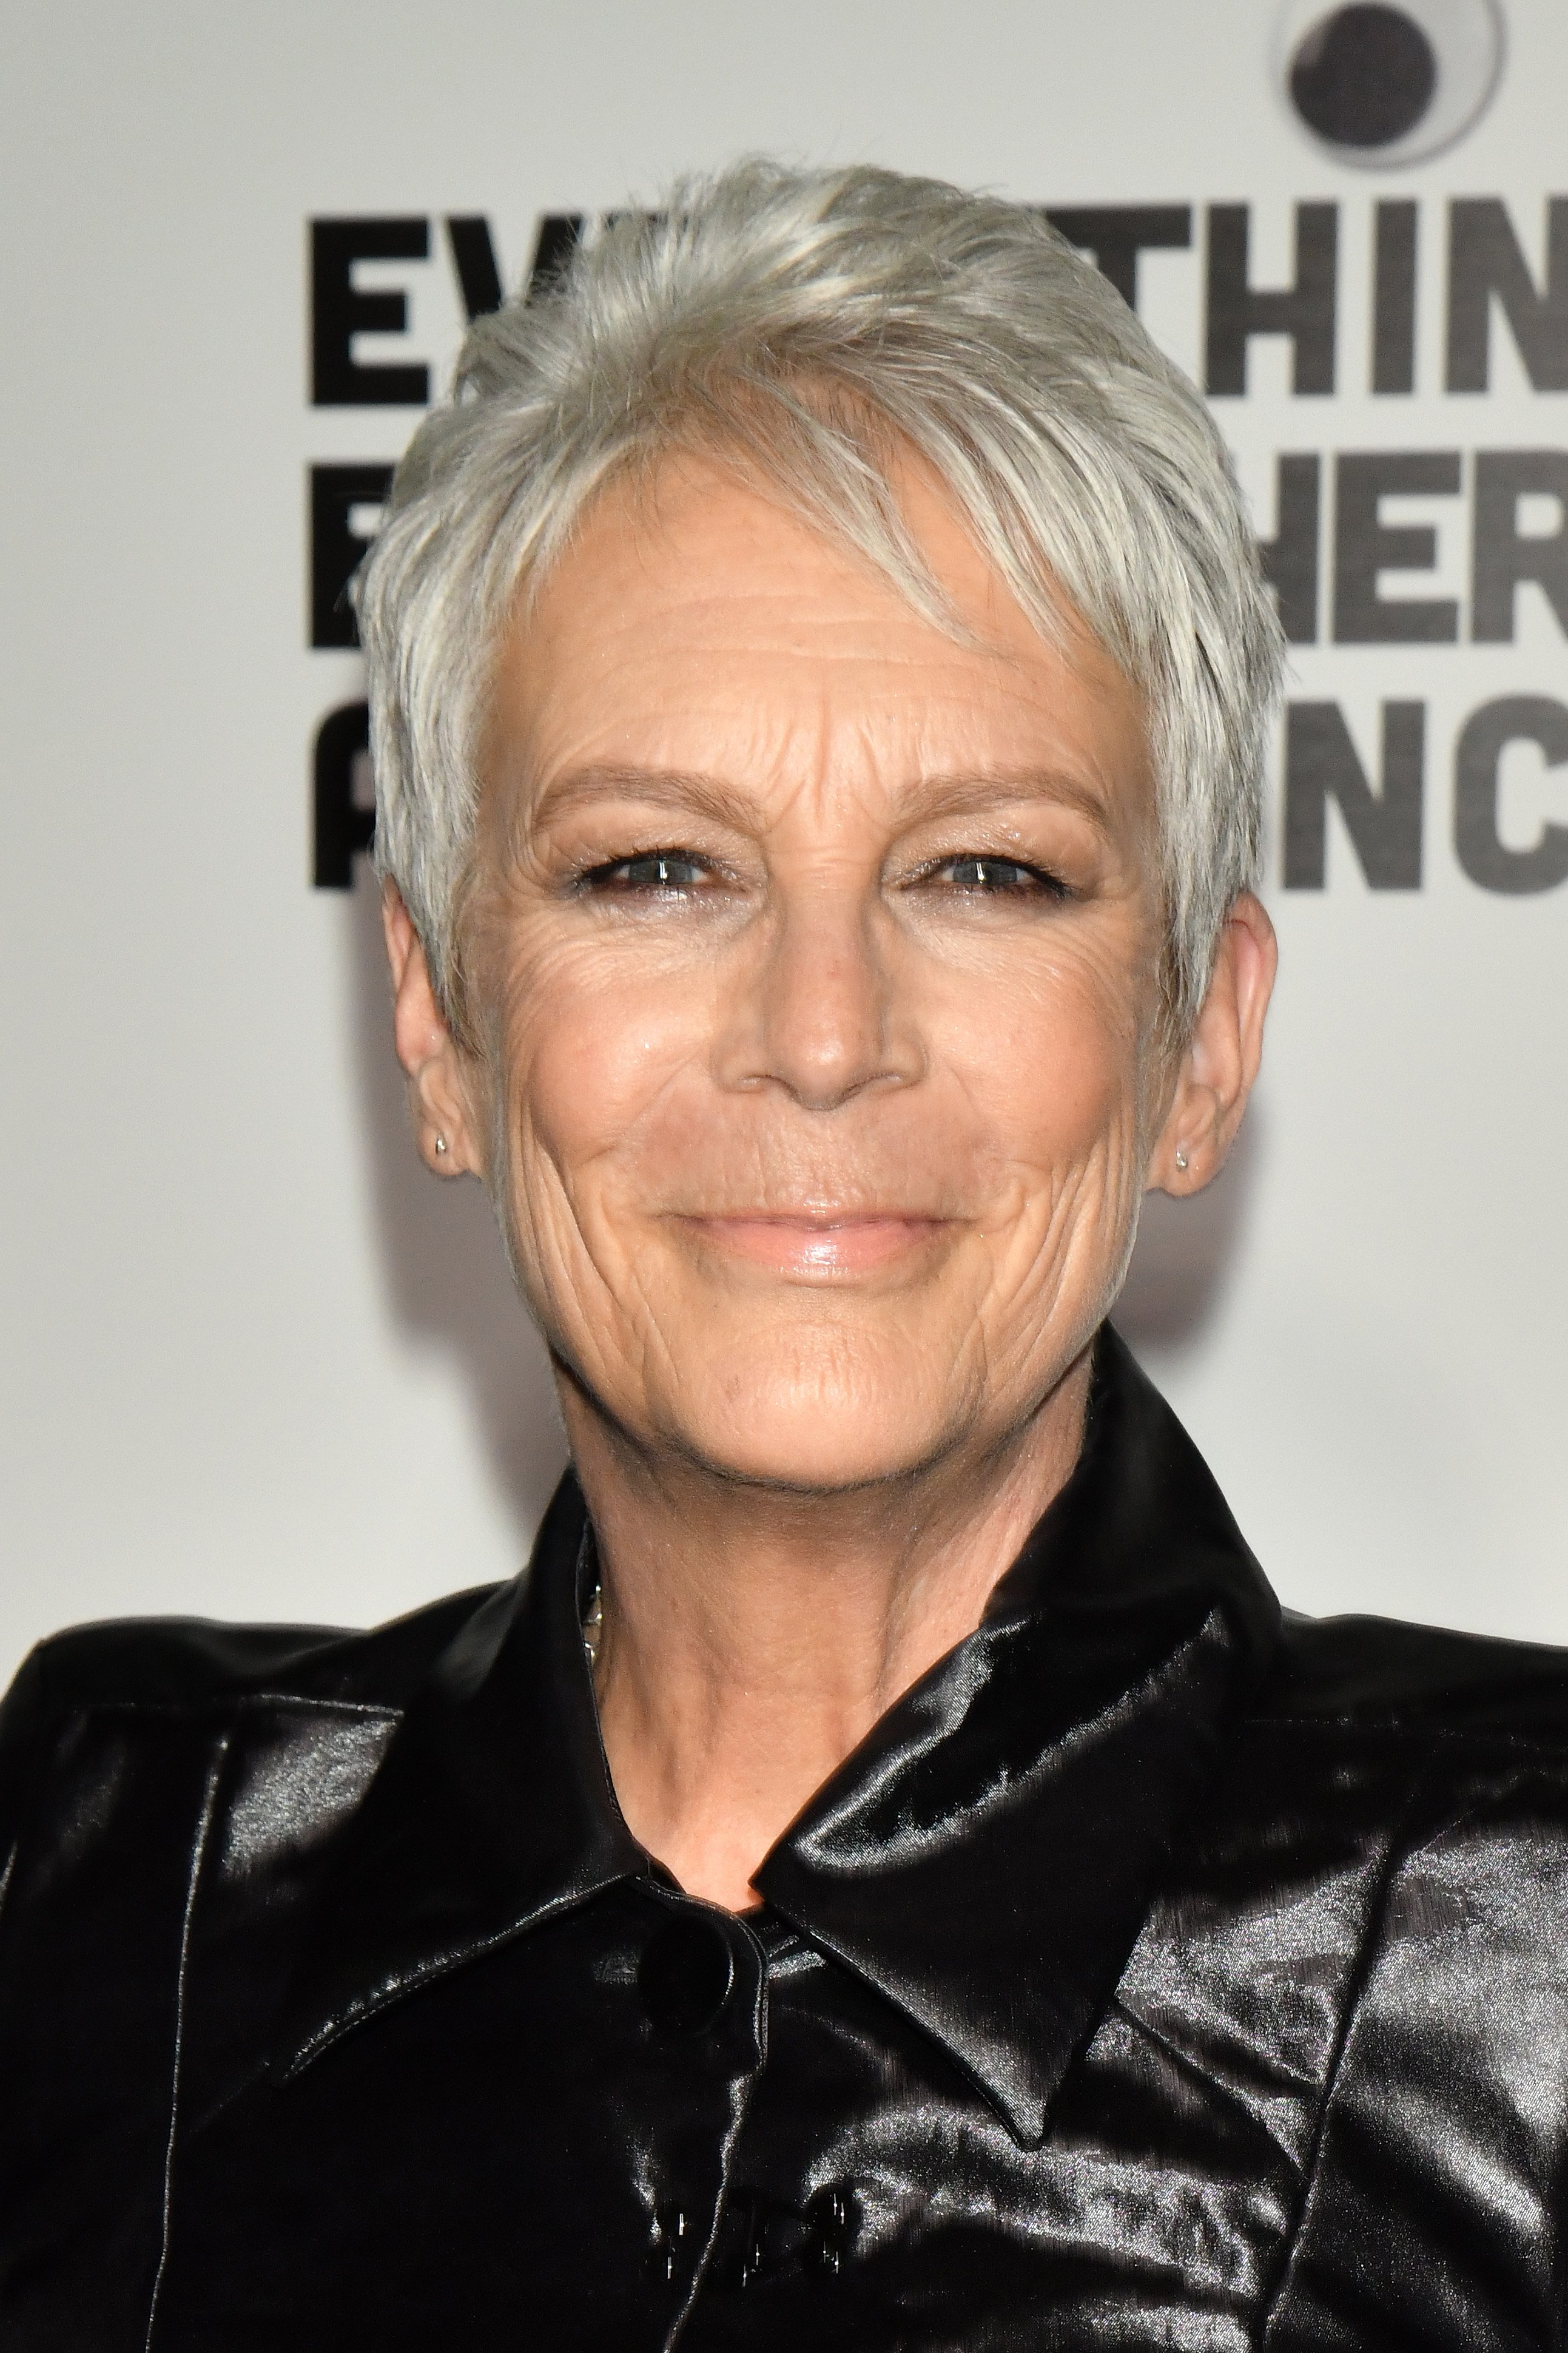 Jamie Lee Curtis arrives at the premiere of 'Everything Everywhere All At Once' at The Theatre at Ace Hotel on March 23, 2022 in Los Angeles, California | Source: Getty Images